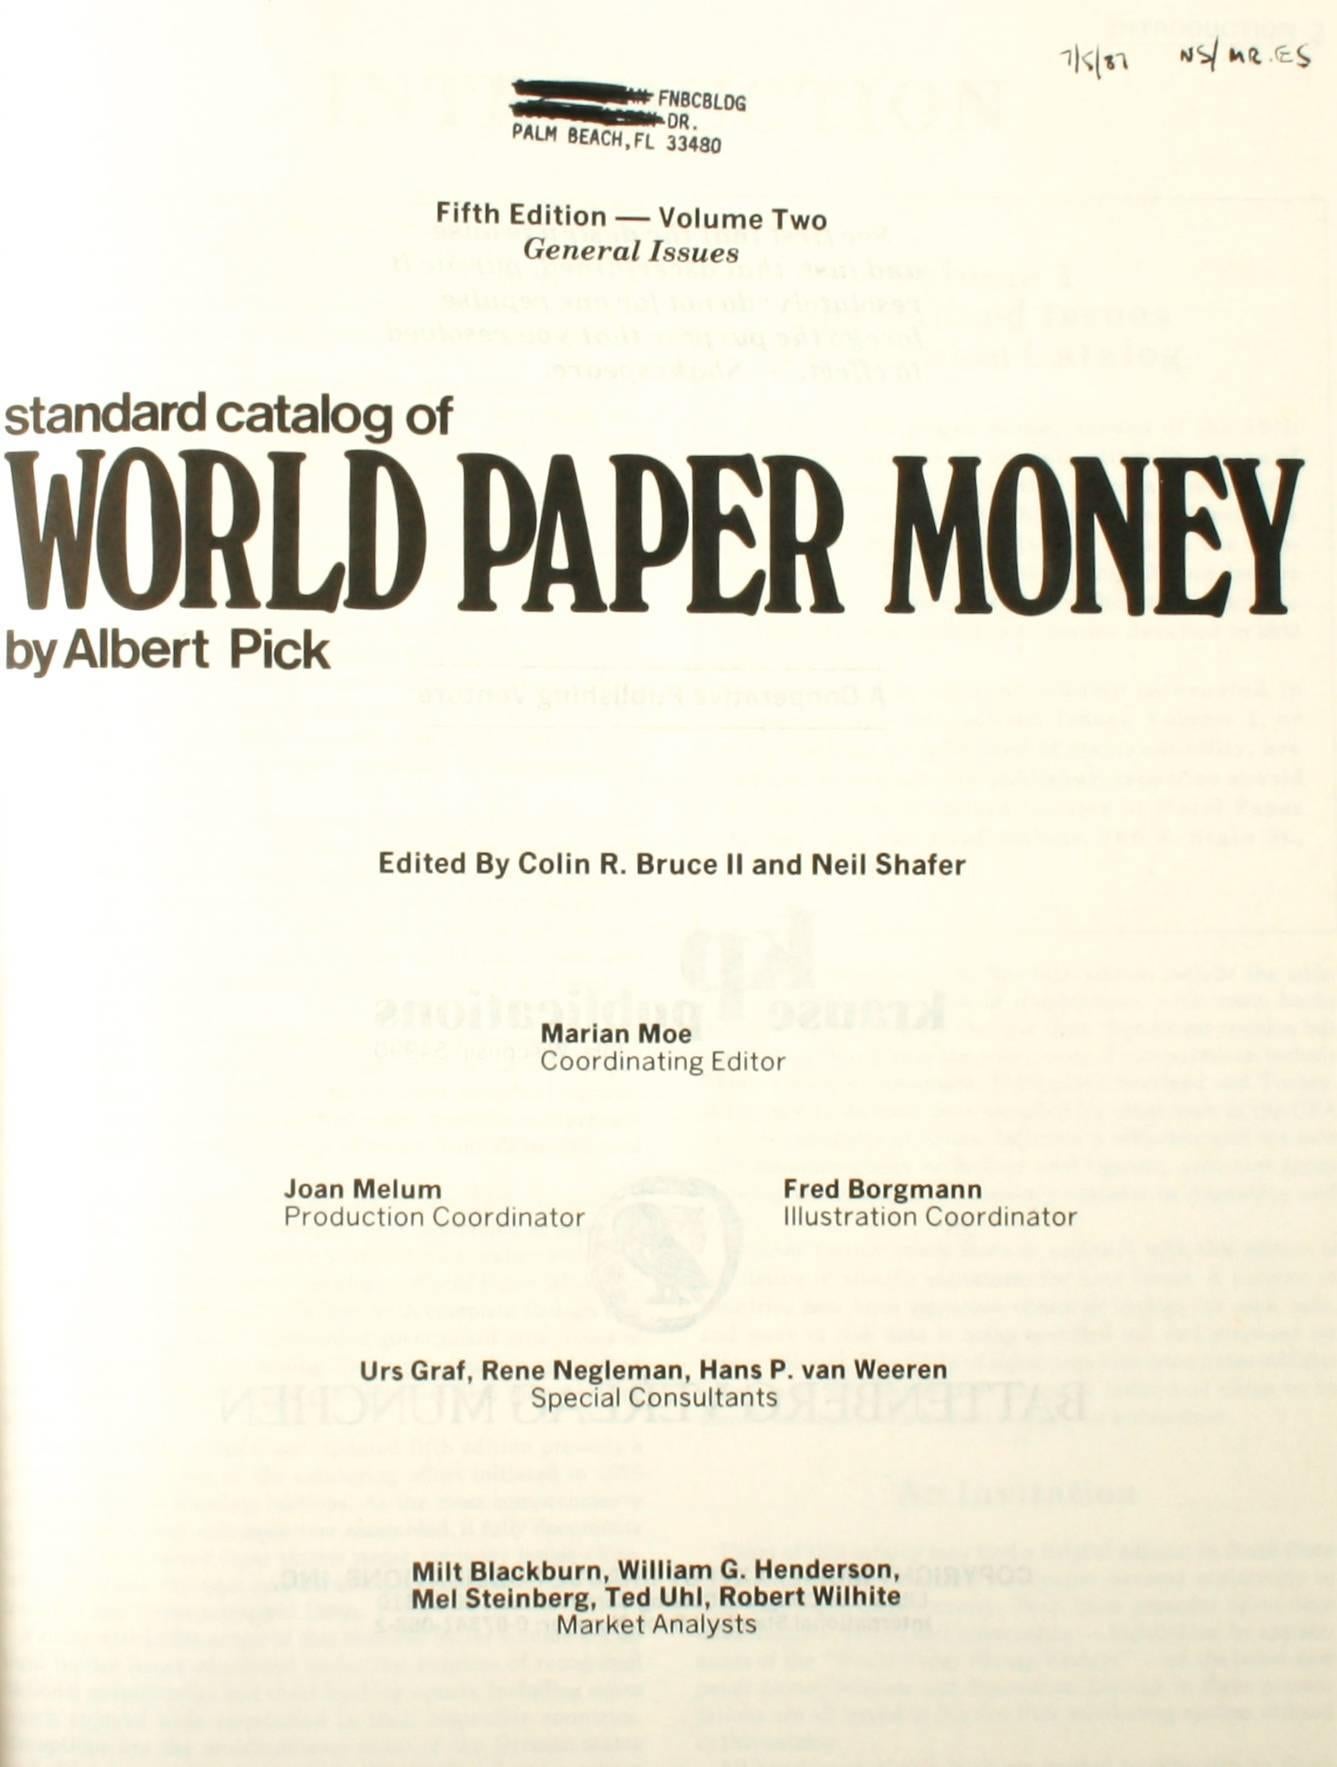 Standard catalogue of World Paper Money by Albert Pick. Lola: Krause Publications, 1986. Fifth edition hardcover. 1087 pp. A catalogue that lists all paper money issued by national governments put out for paper money collectors. It lists 21,000